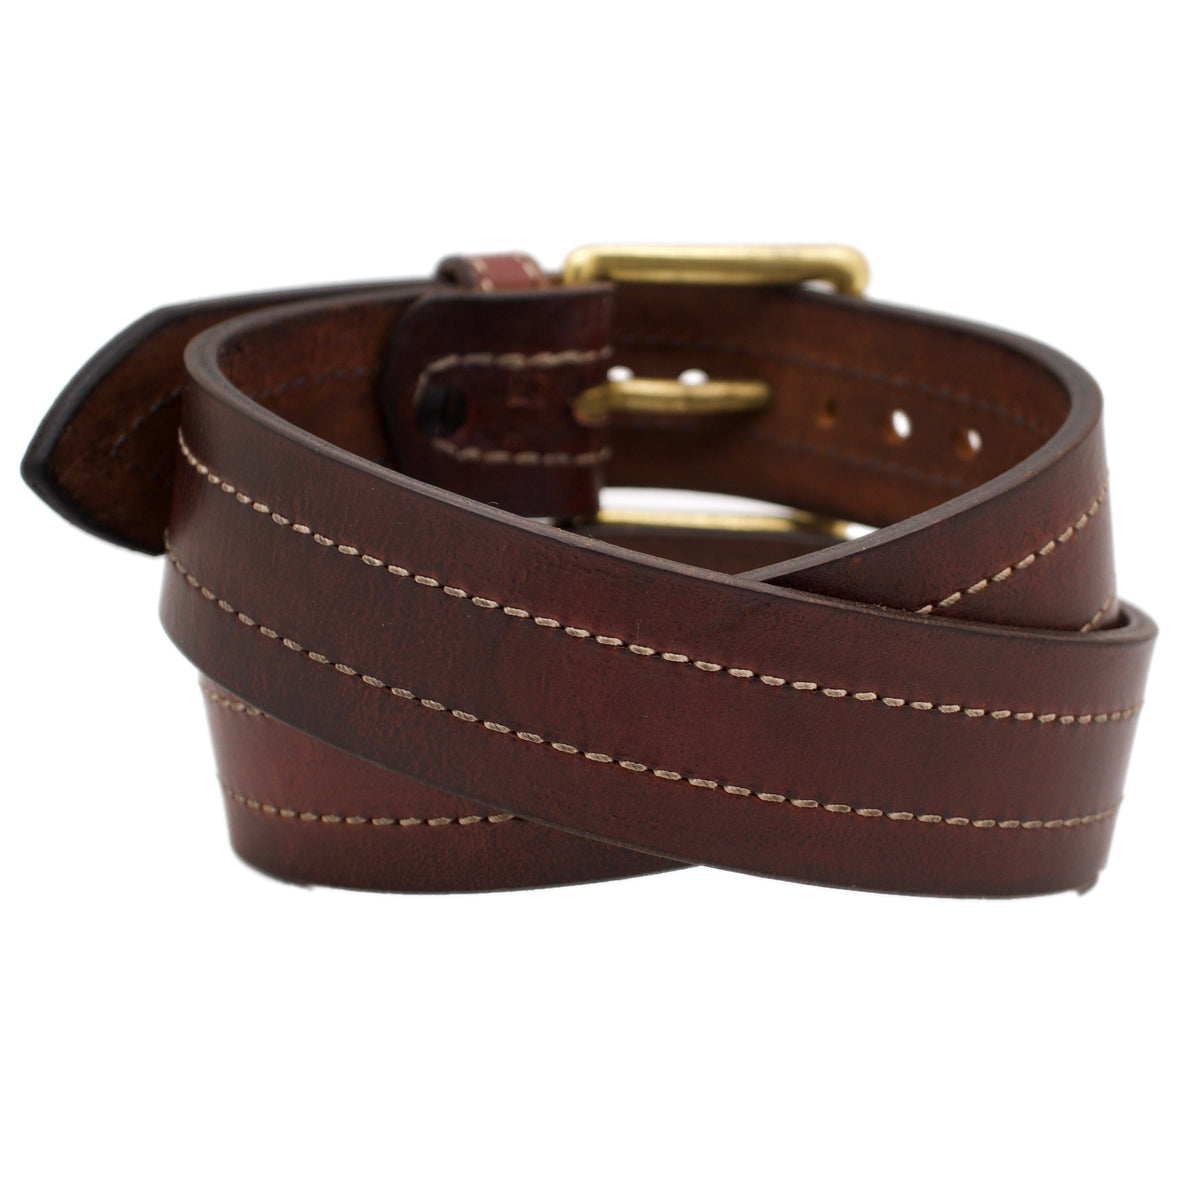 guess brown leather belt size 28 29